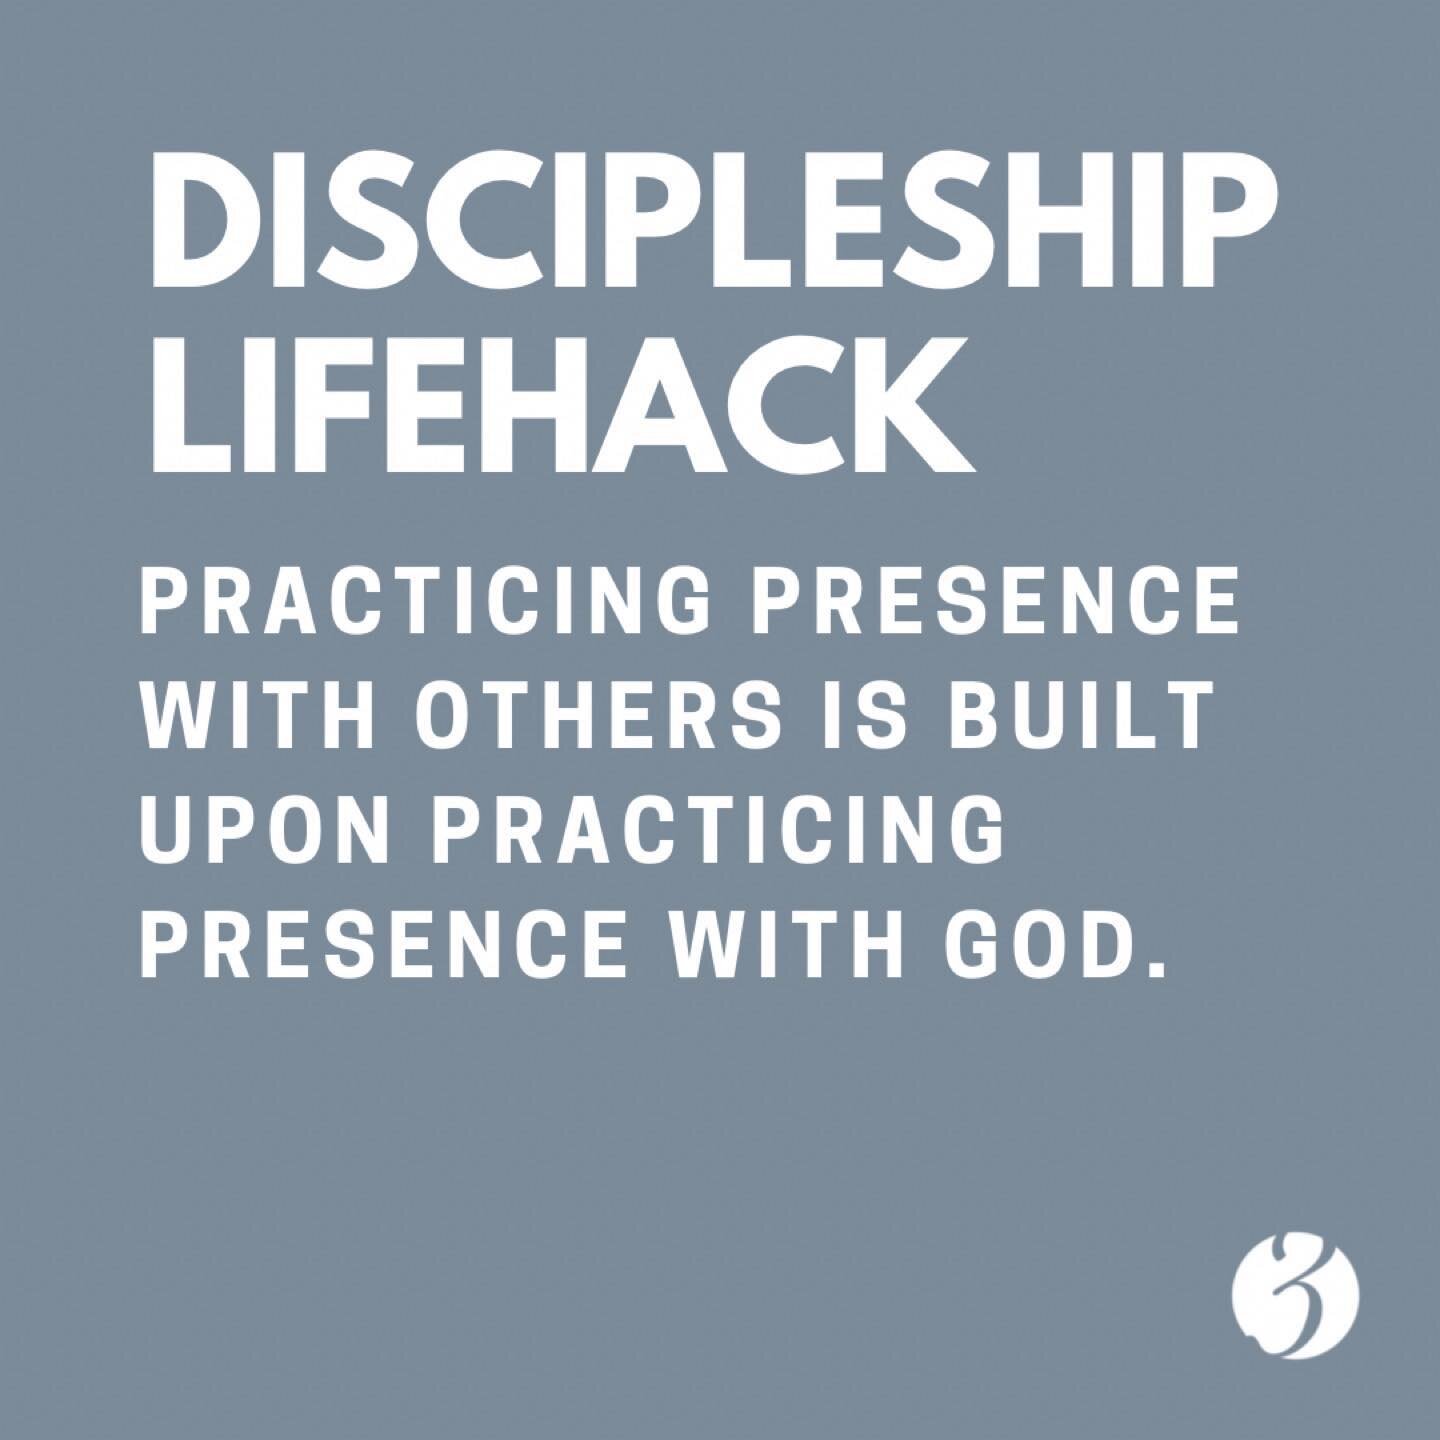 Often, we can feel stuck making disciples or discovering persons of peace. First and foremost, are you spending time with God? Second, ask God to make you more like Him so when you do spend time with others, you put his words, works, and ways on a he